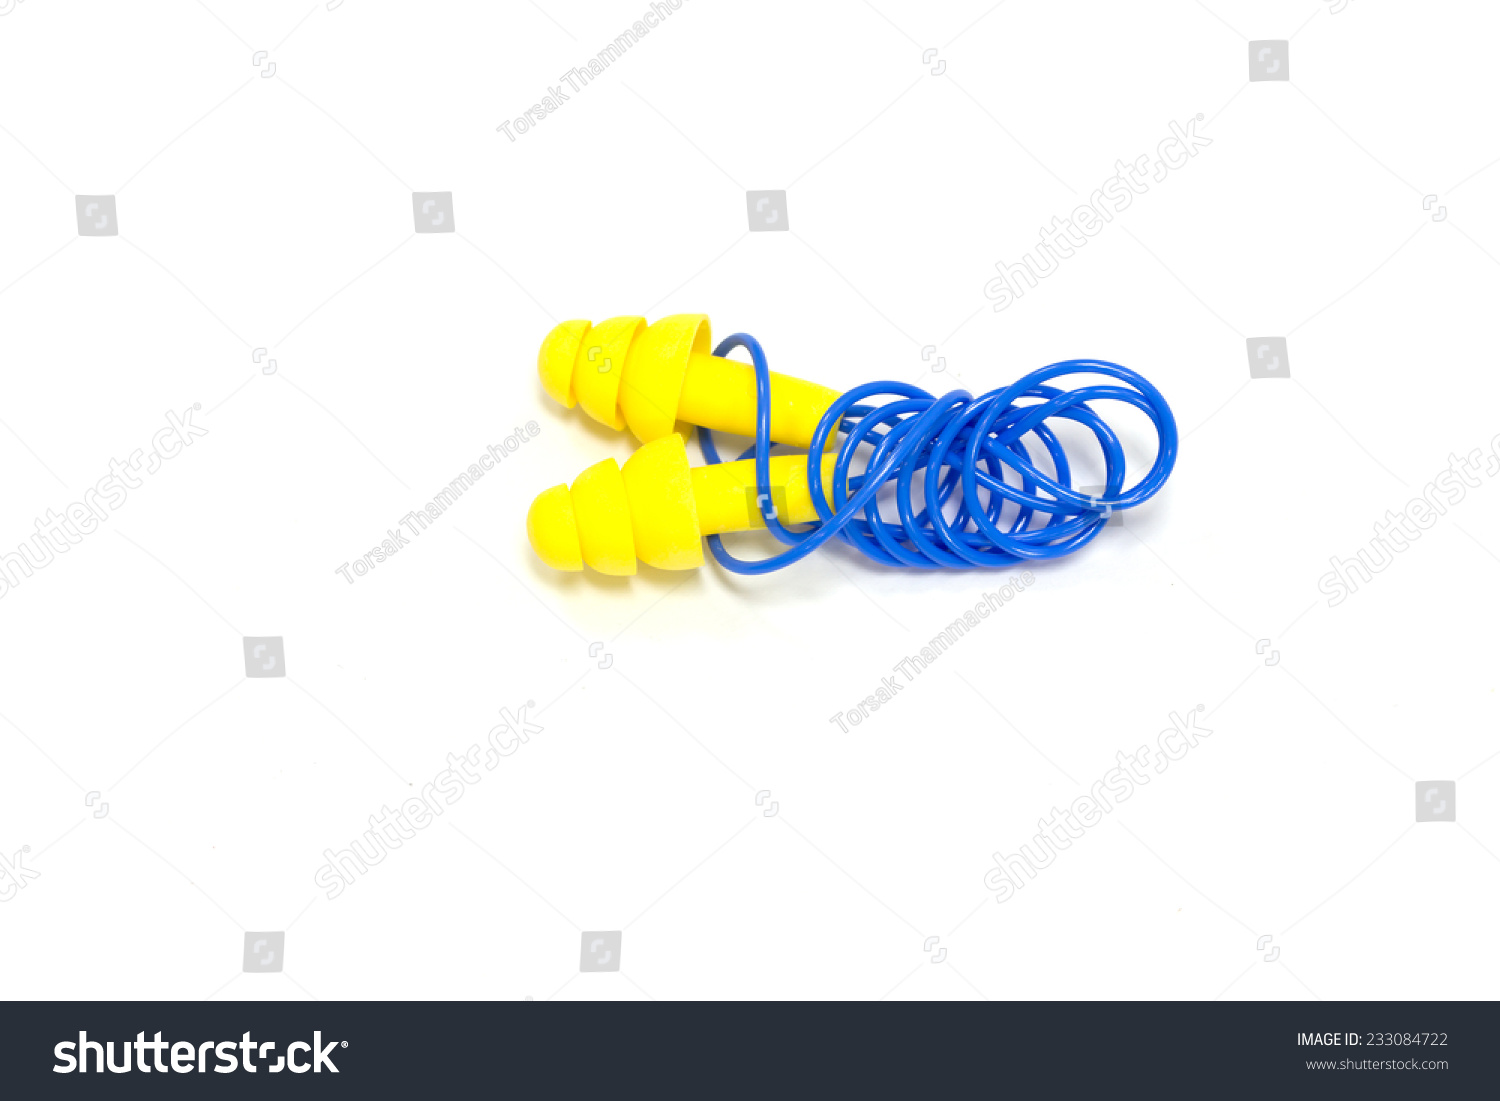 Download Yellow Earplugs Blue Band Stock Photo Edit Now 233084722 PSD Mockup Templates